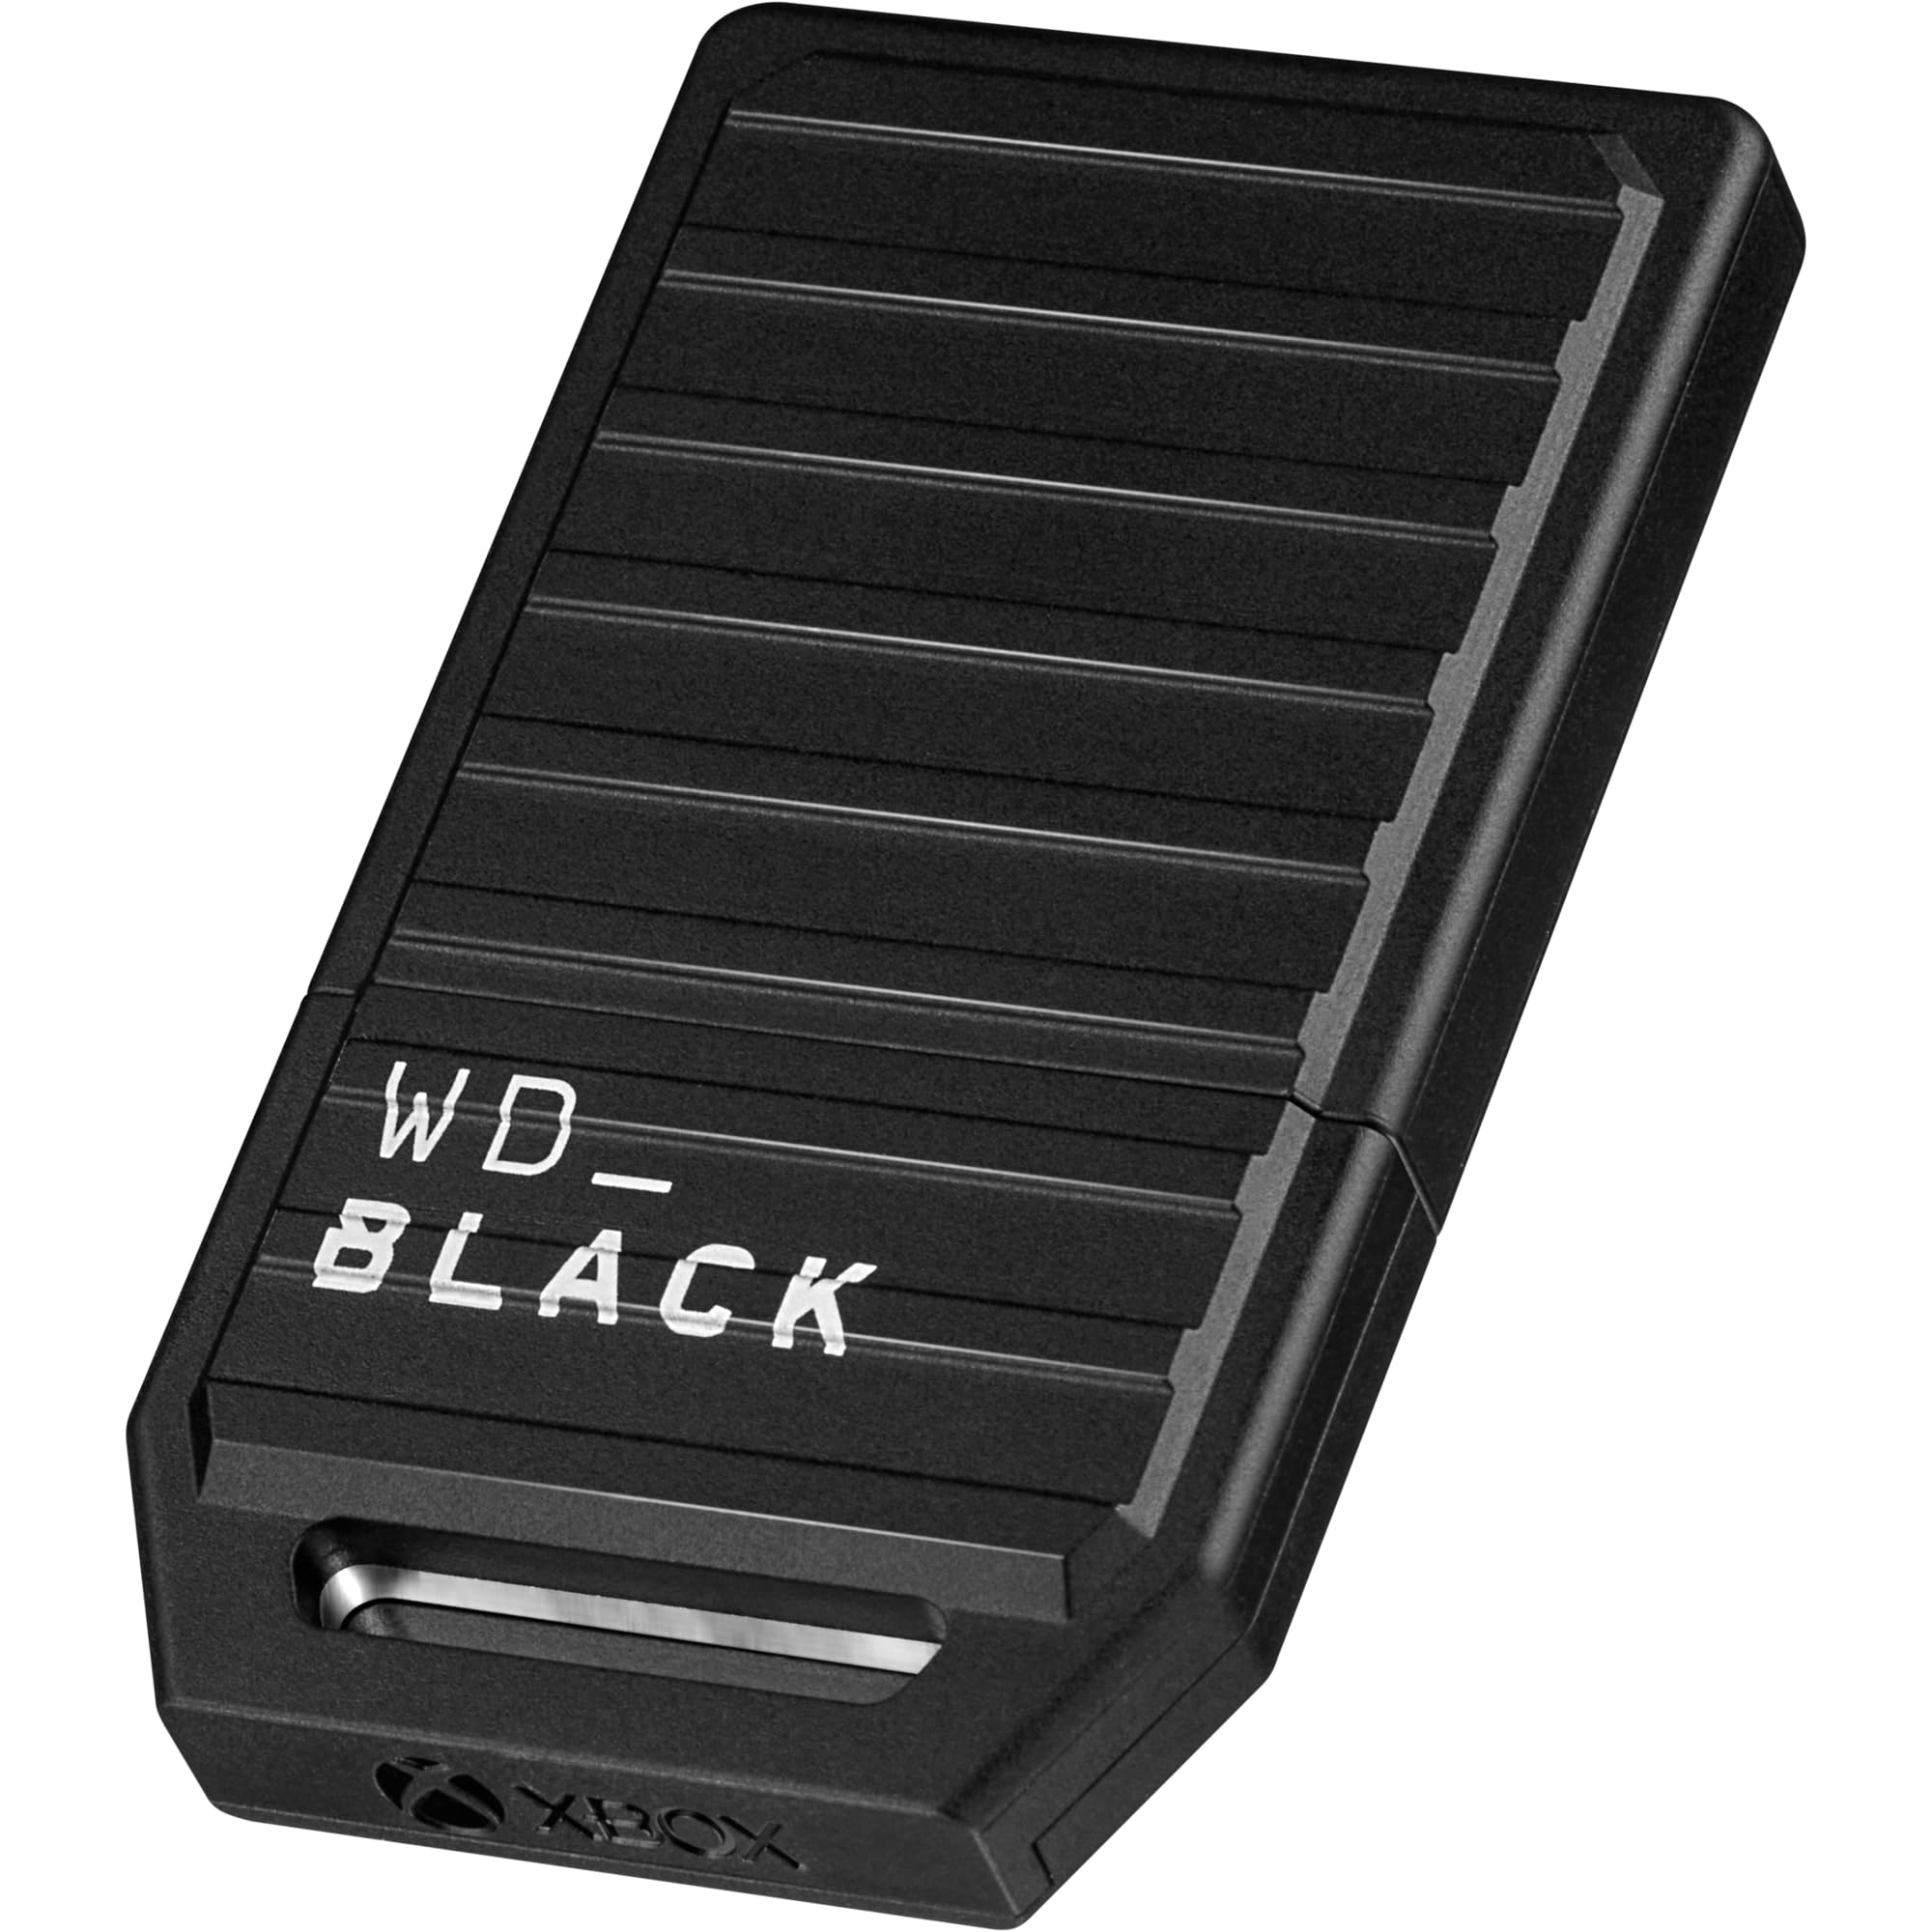 WD_BLACK 1TB C50 Storage Expansion Card for Xbox Series X|S - Quick Resume - Plug & Play - WDBMPH0010BNC-WCSN